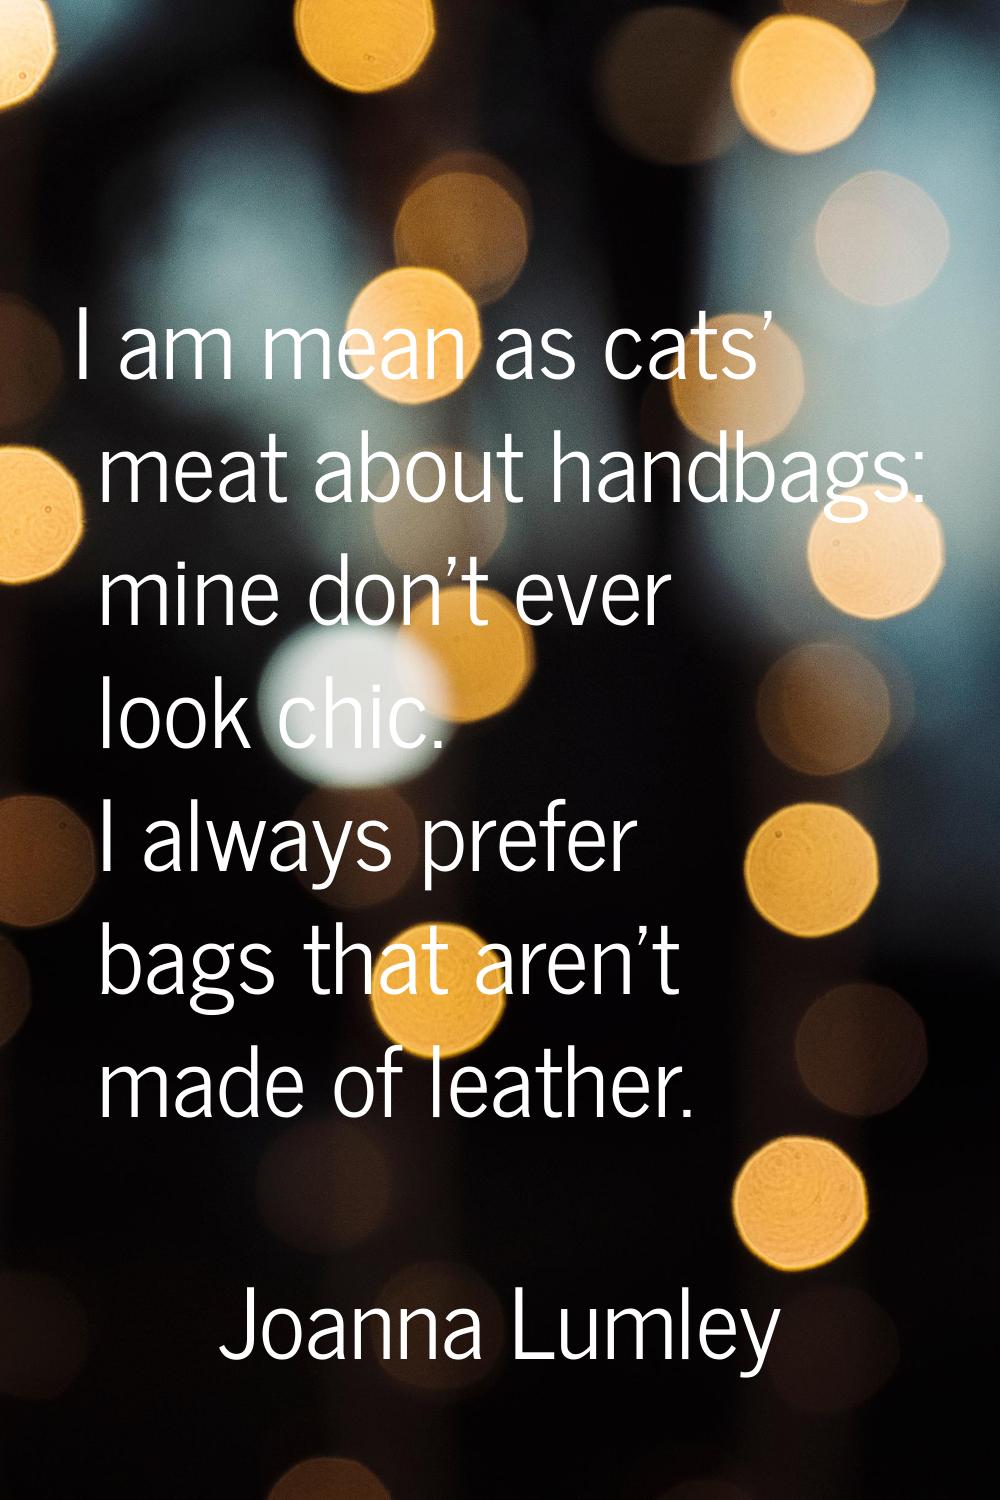 I am mean as cats' meat about handbags: mine don't ever look chic. I always prefer bags that aren't